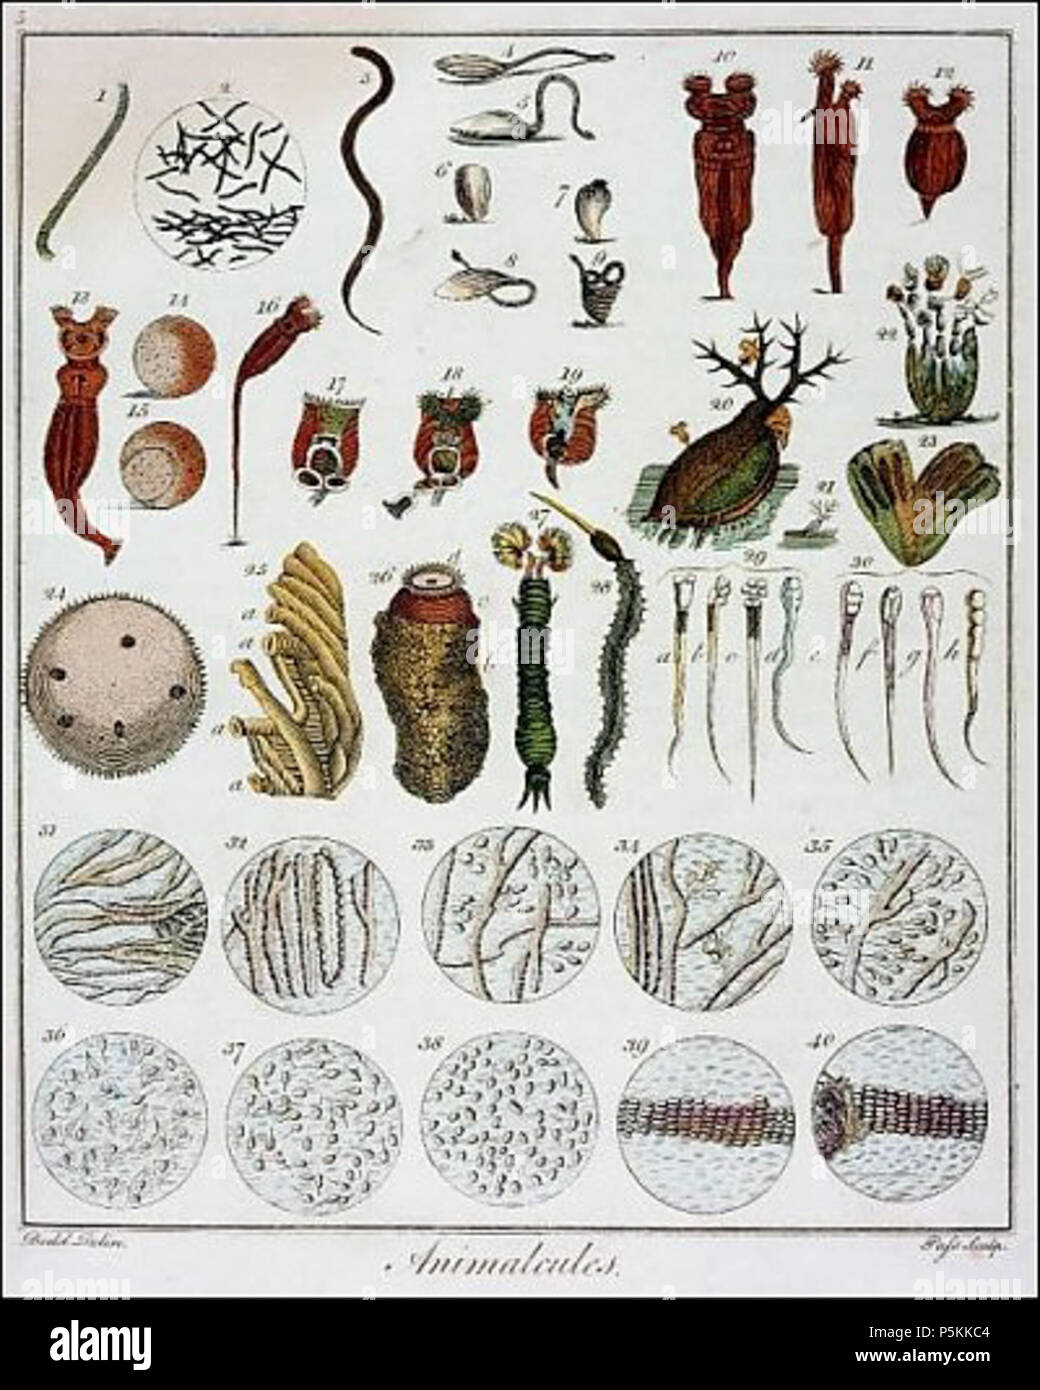 N/A. English: 'Animalcules' observed by Anton van Leeuwenhoek, c1795. 1795. Anton van Leeuwenhoek 103 Animalcules observed by anton van leeuwenhoek c1795 1228575 Stock Photo